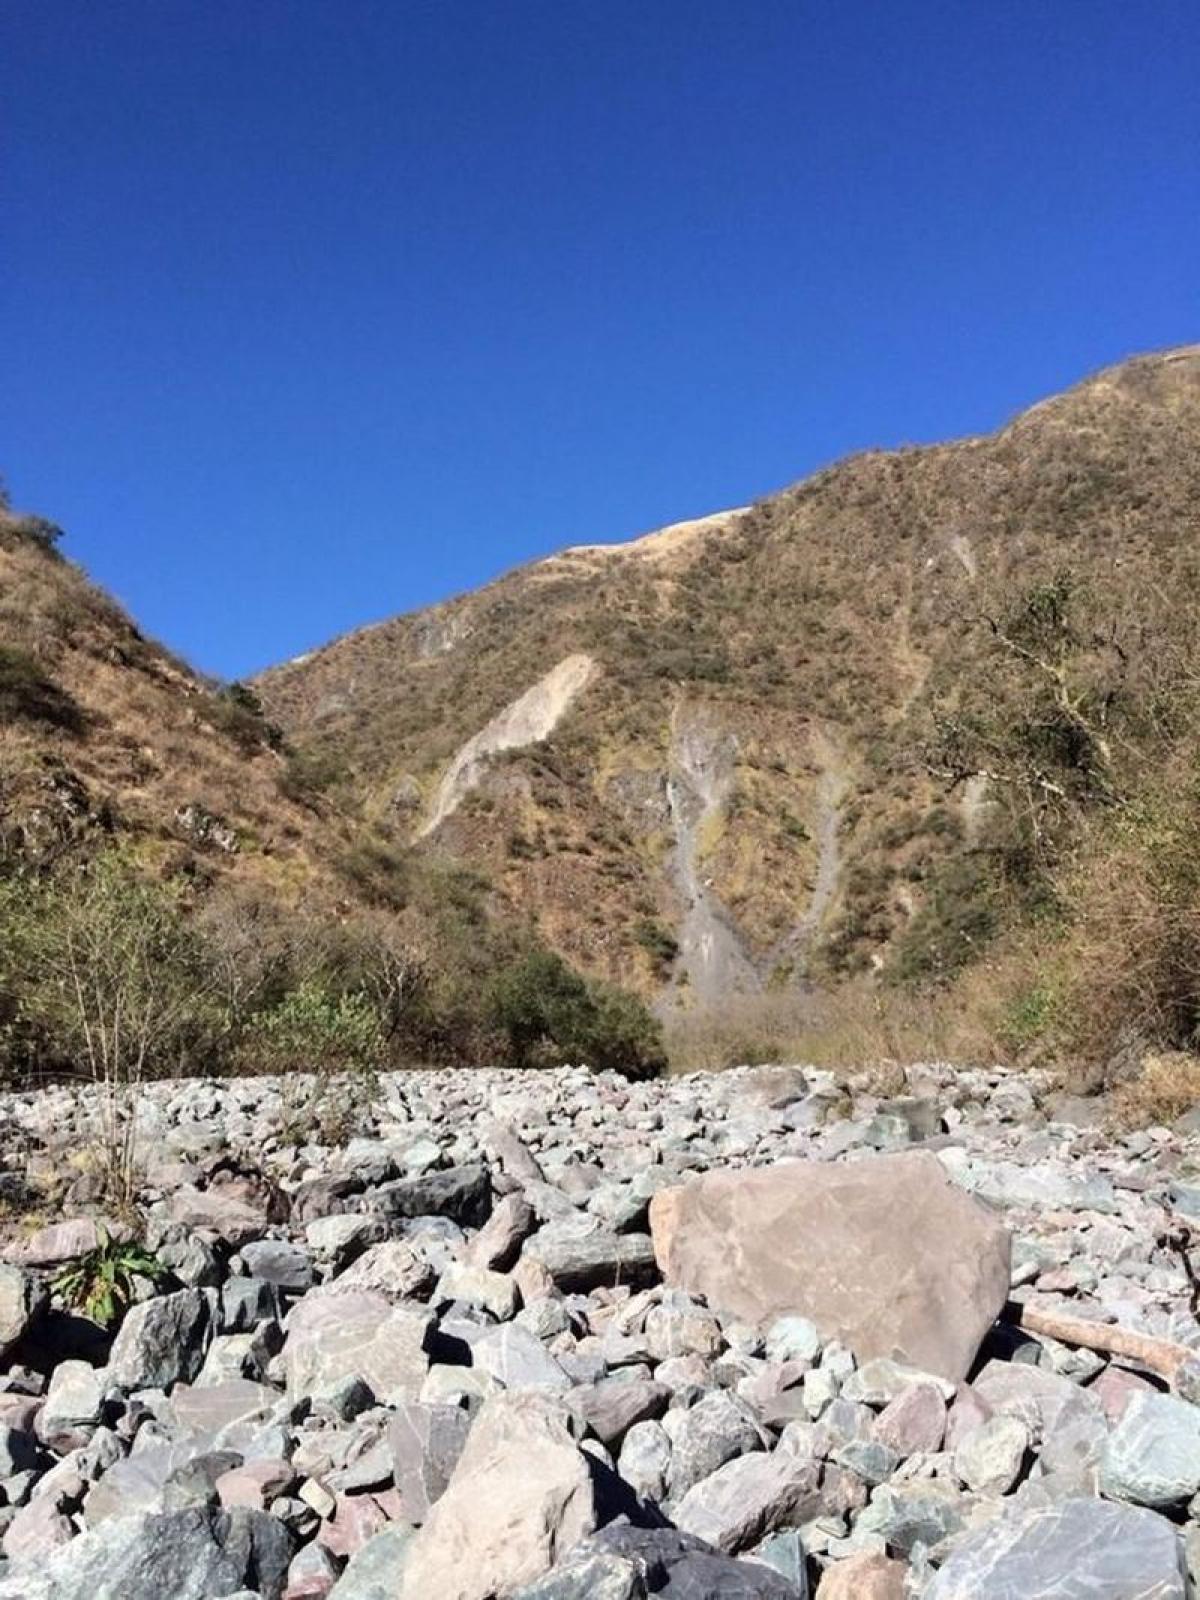 Picture of Residential Land For Sale in Salta, Salta, Argentina